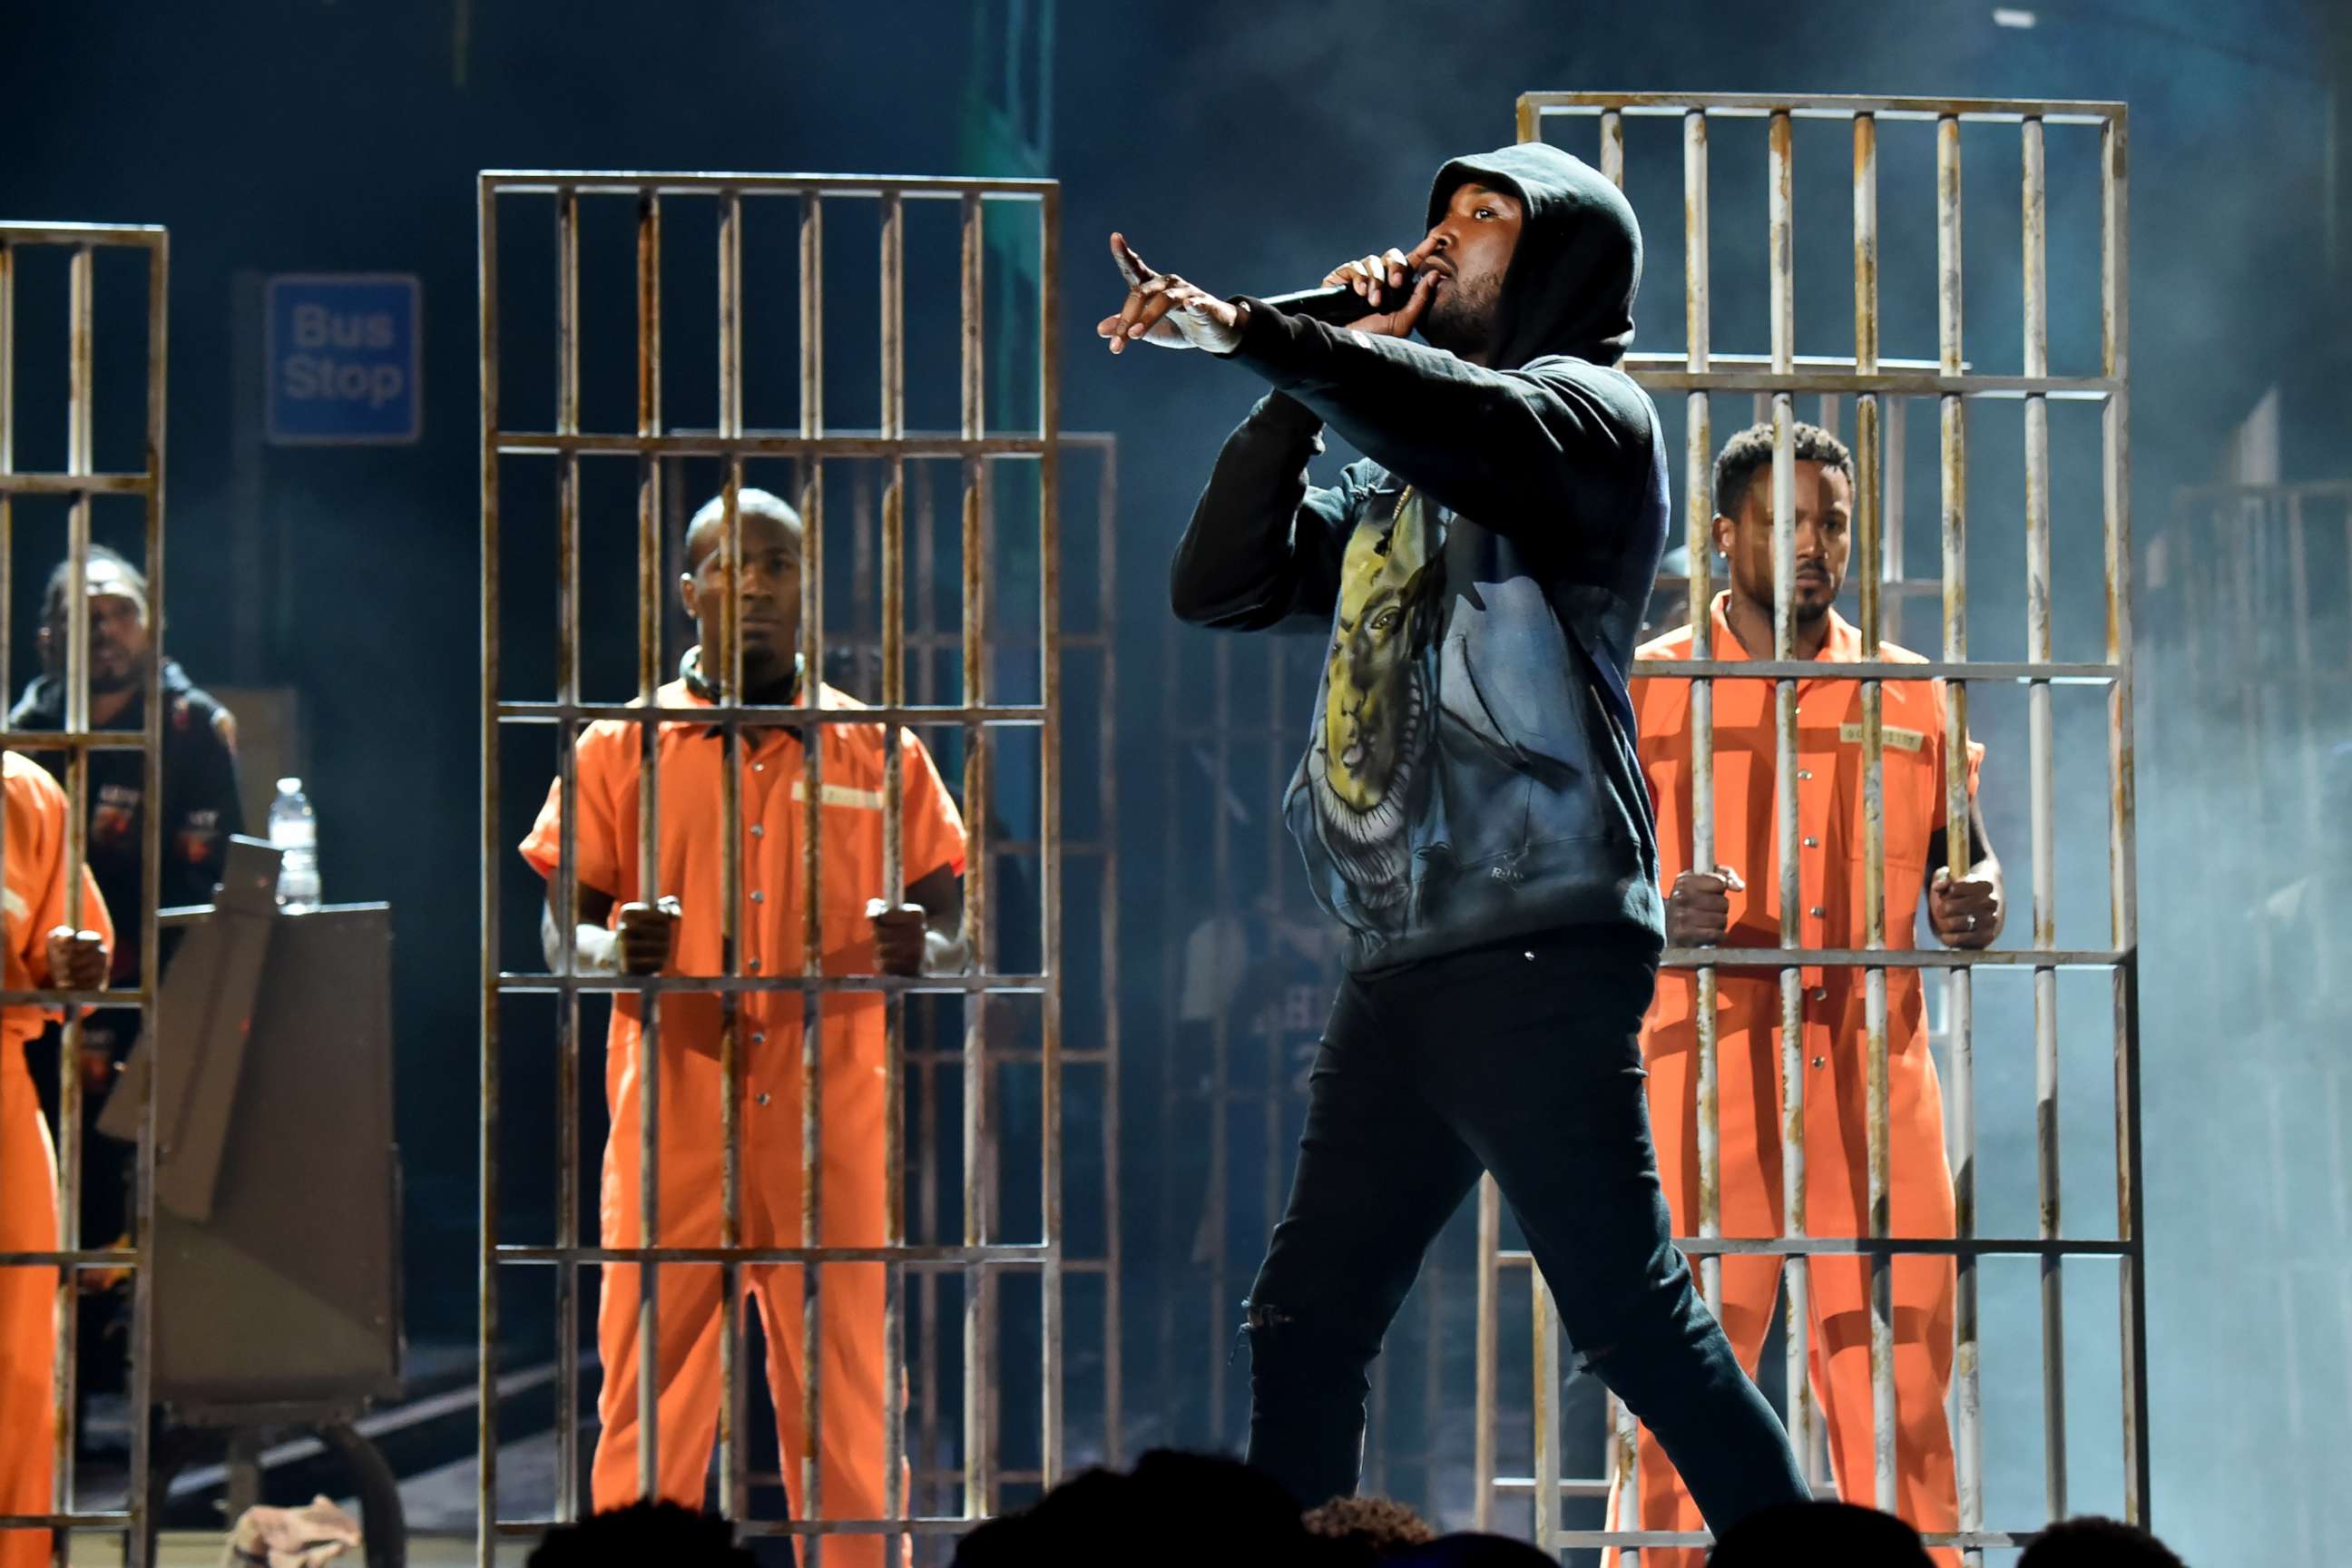 PHOTO: Meek Mill performs onstage at the 2018 BET Awards at Microsoft Theater on June 24, 2018 in Los Angeles.  